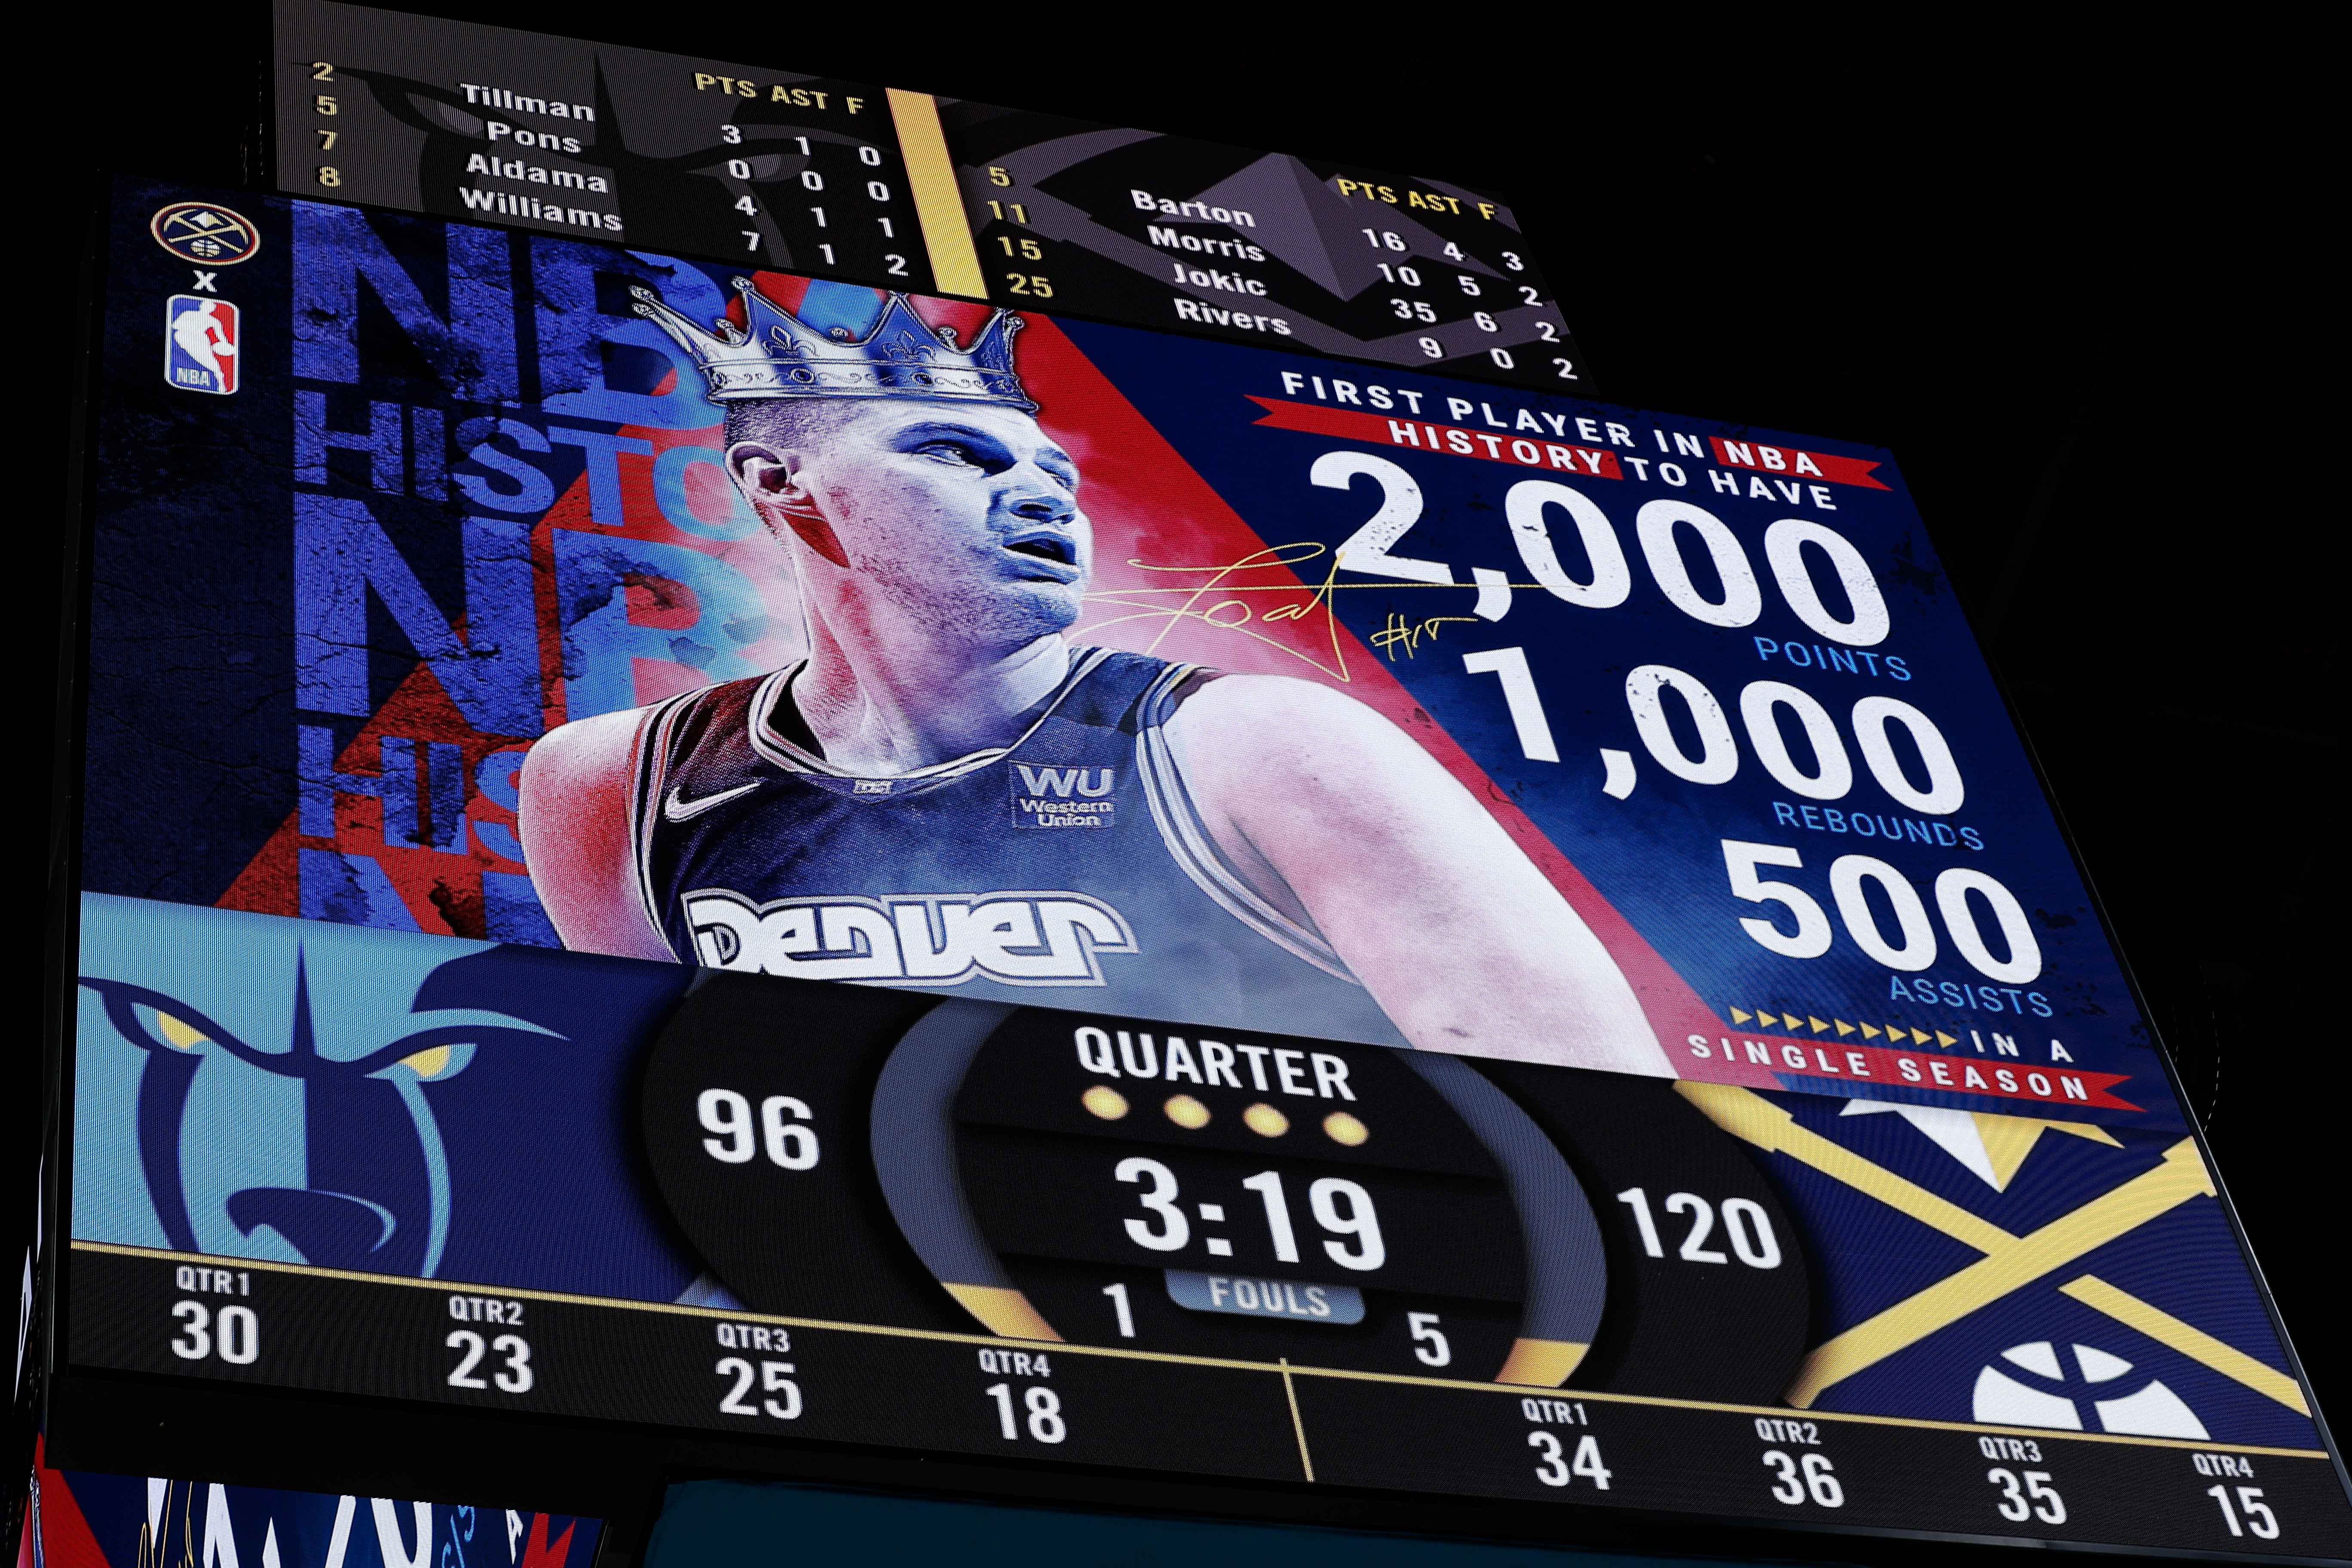 NBA launches new tracking system to capture player statistics